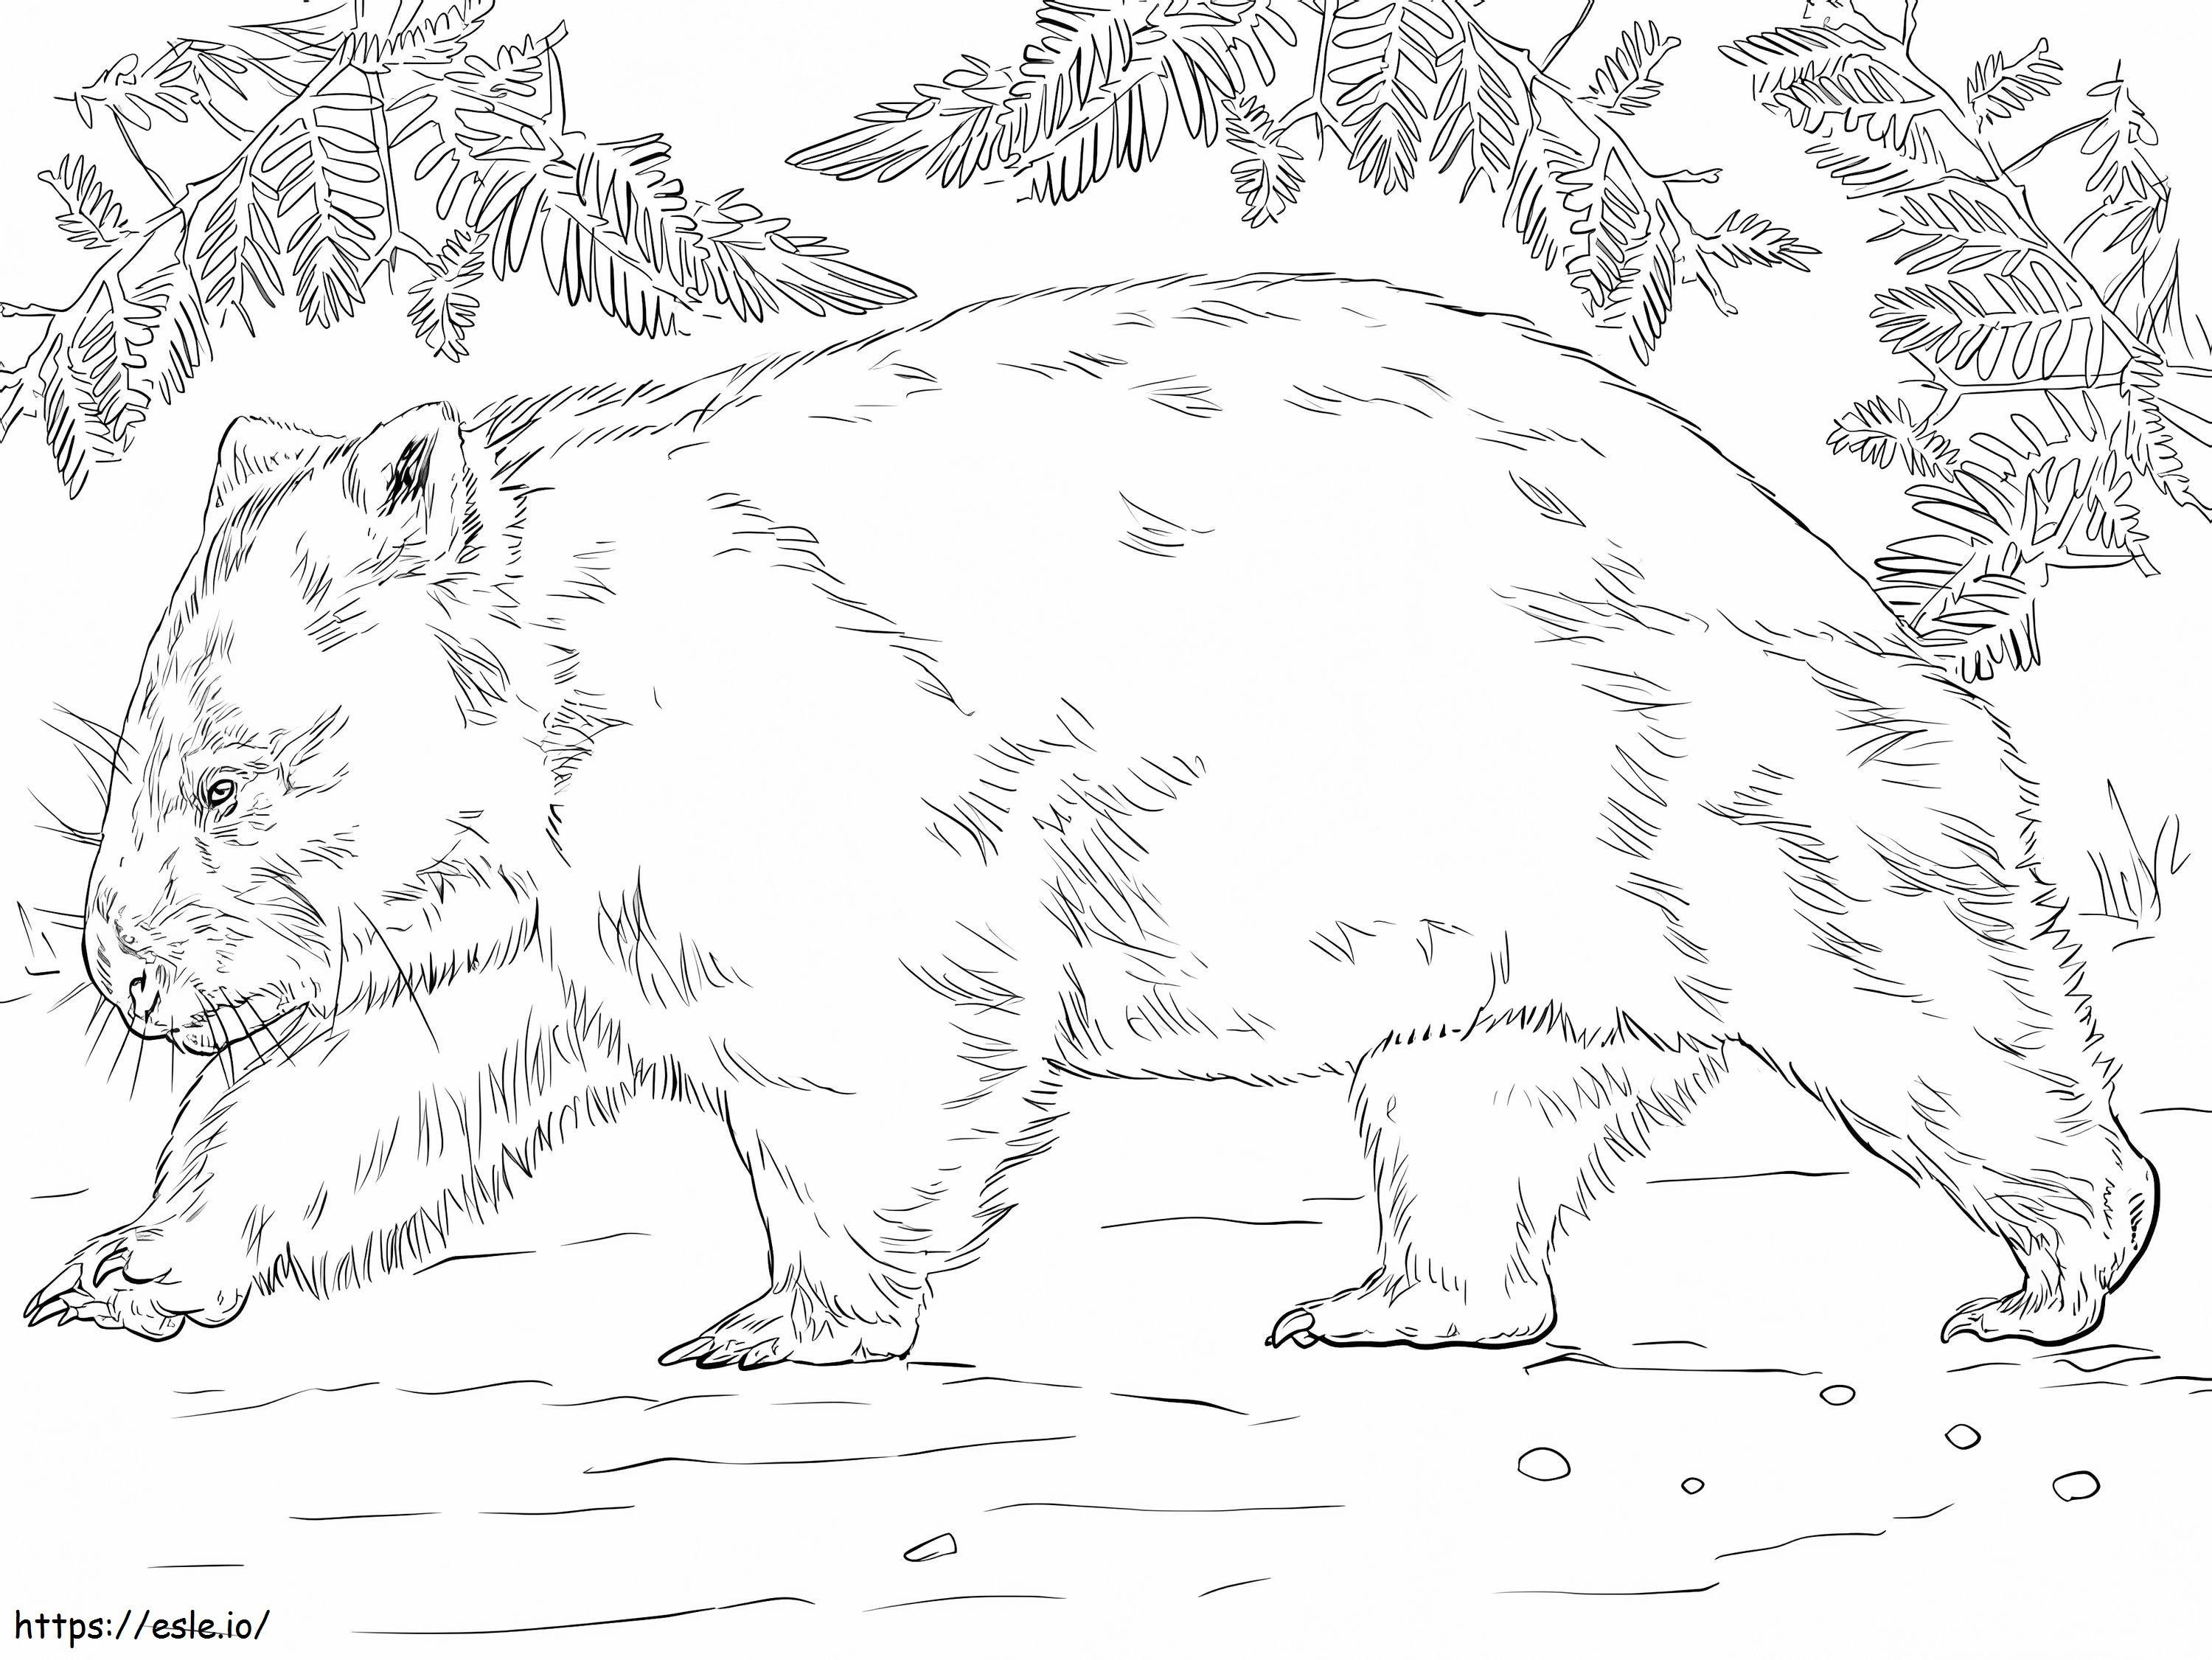 Wombat Bear coloring page